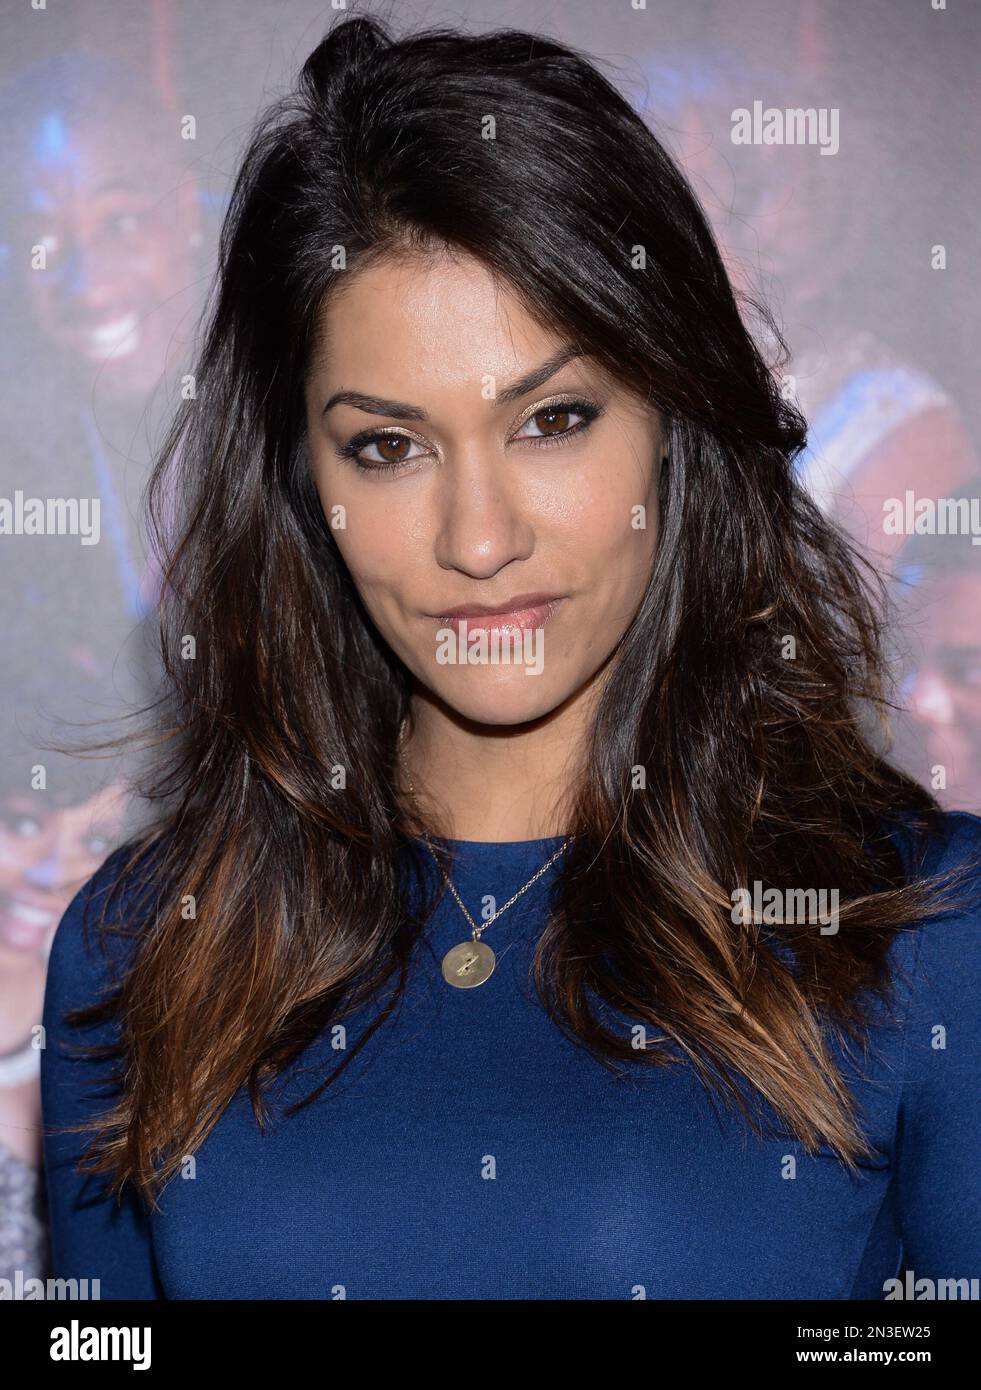 Actress Janina Gavankar Attends The Premiere Of Top Five At The